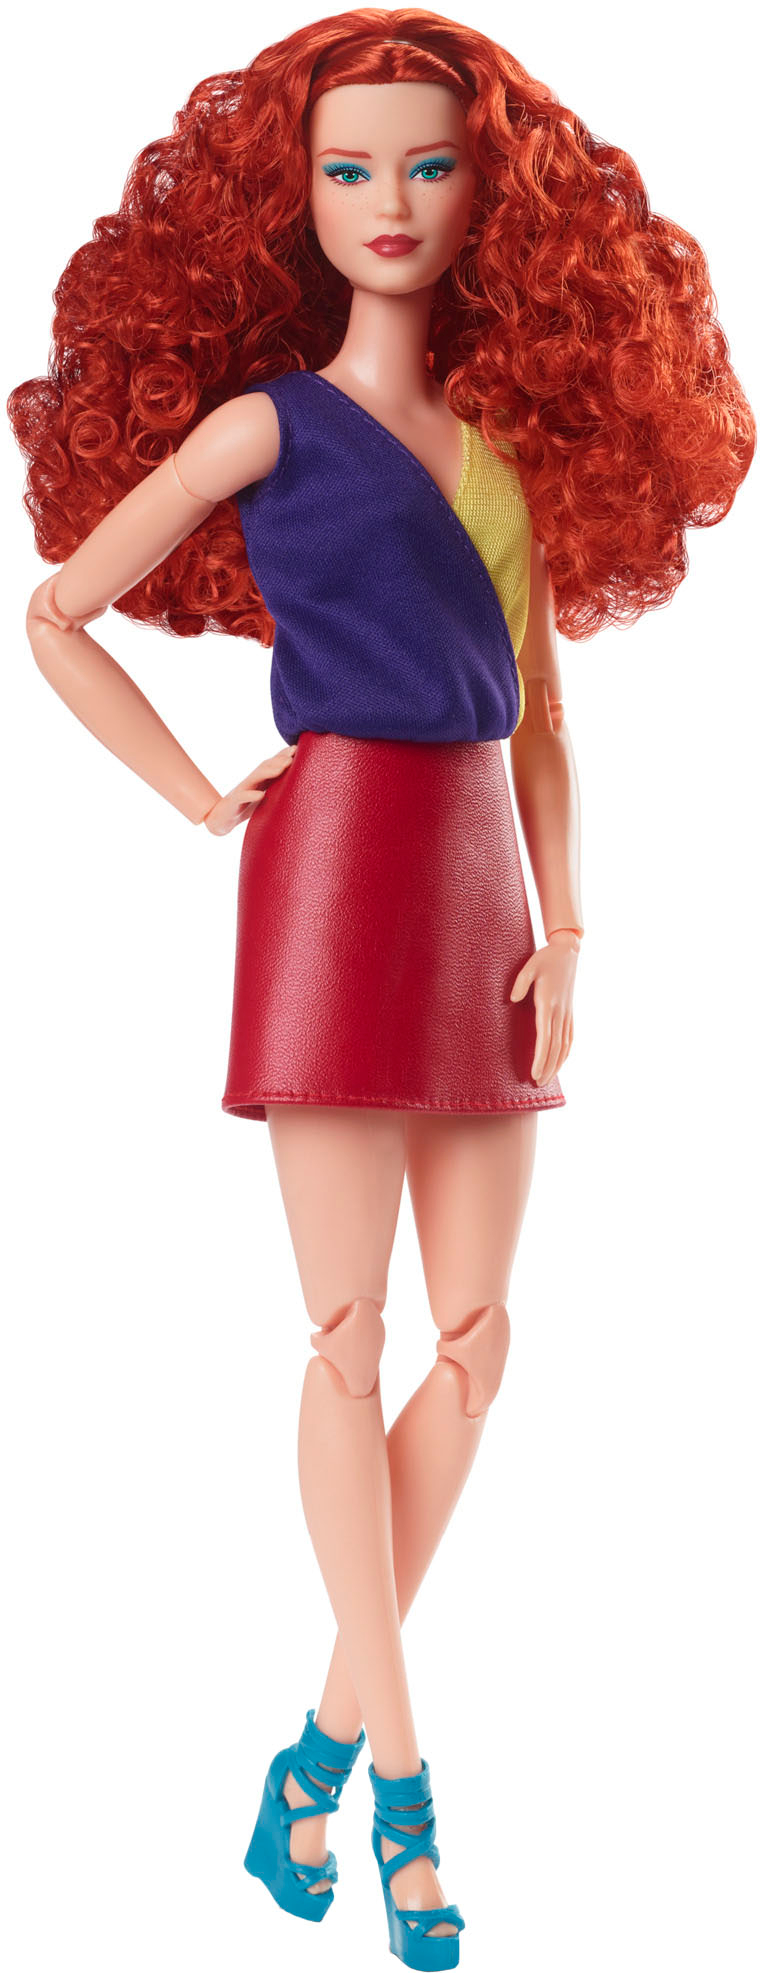 Barbie Looks Signature Curly Red Hair 13 Doll HJW80 - Best Buy